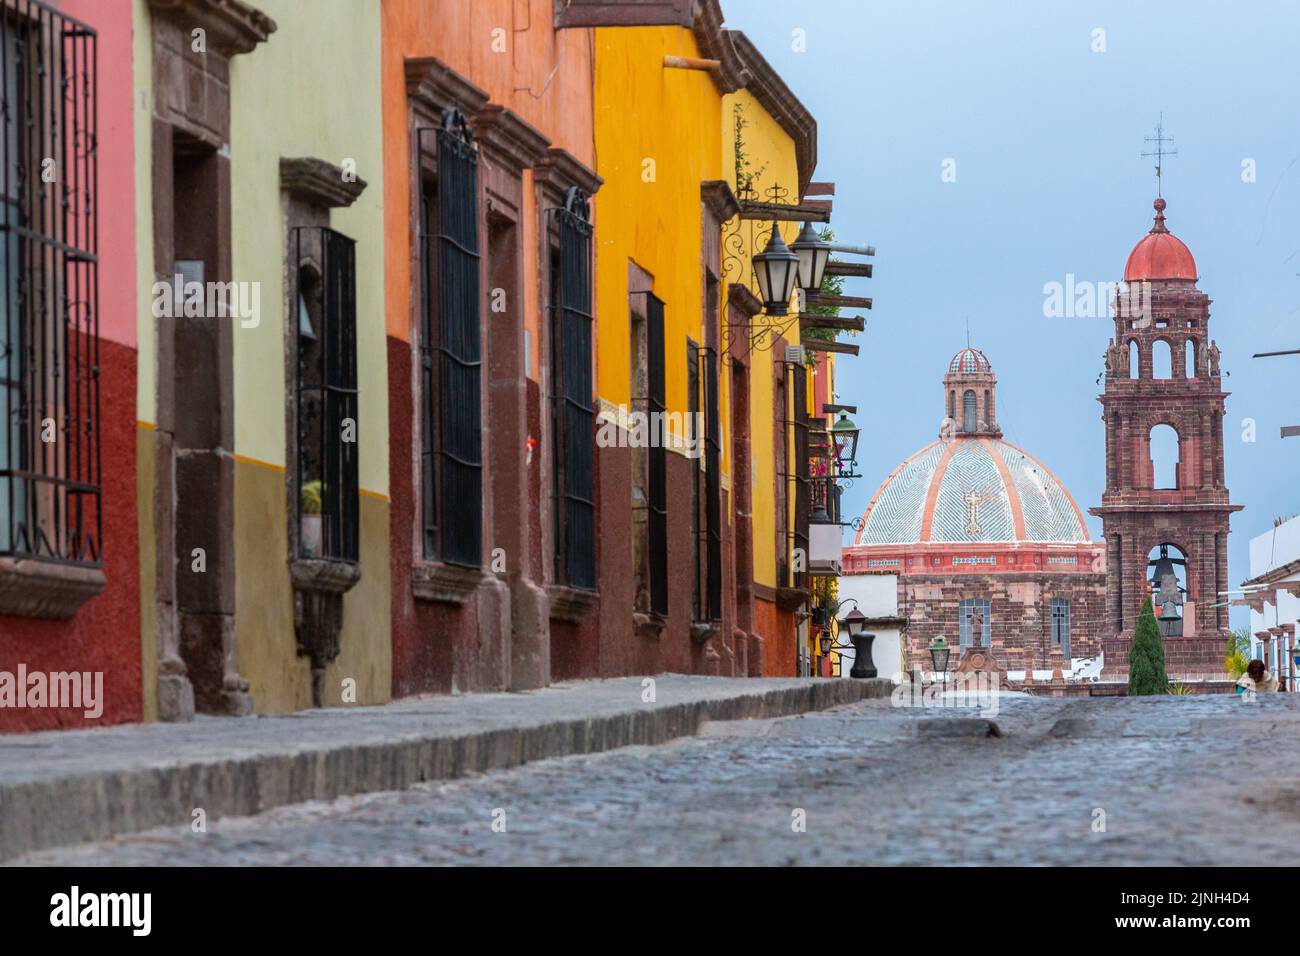 The neoclassical style dome and bell tower of Iglesia de San Francisco peaks over the cobblestone road on Calle Recreo in the historic city center of San Miguel de Allende, Mexico. Stock Photo